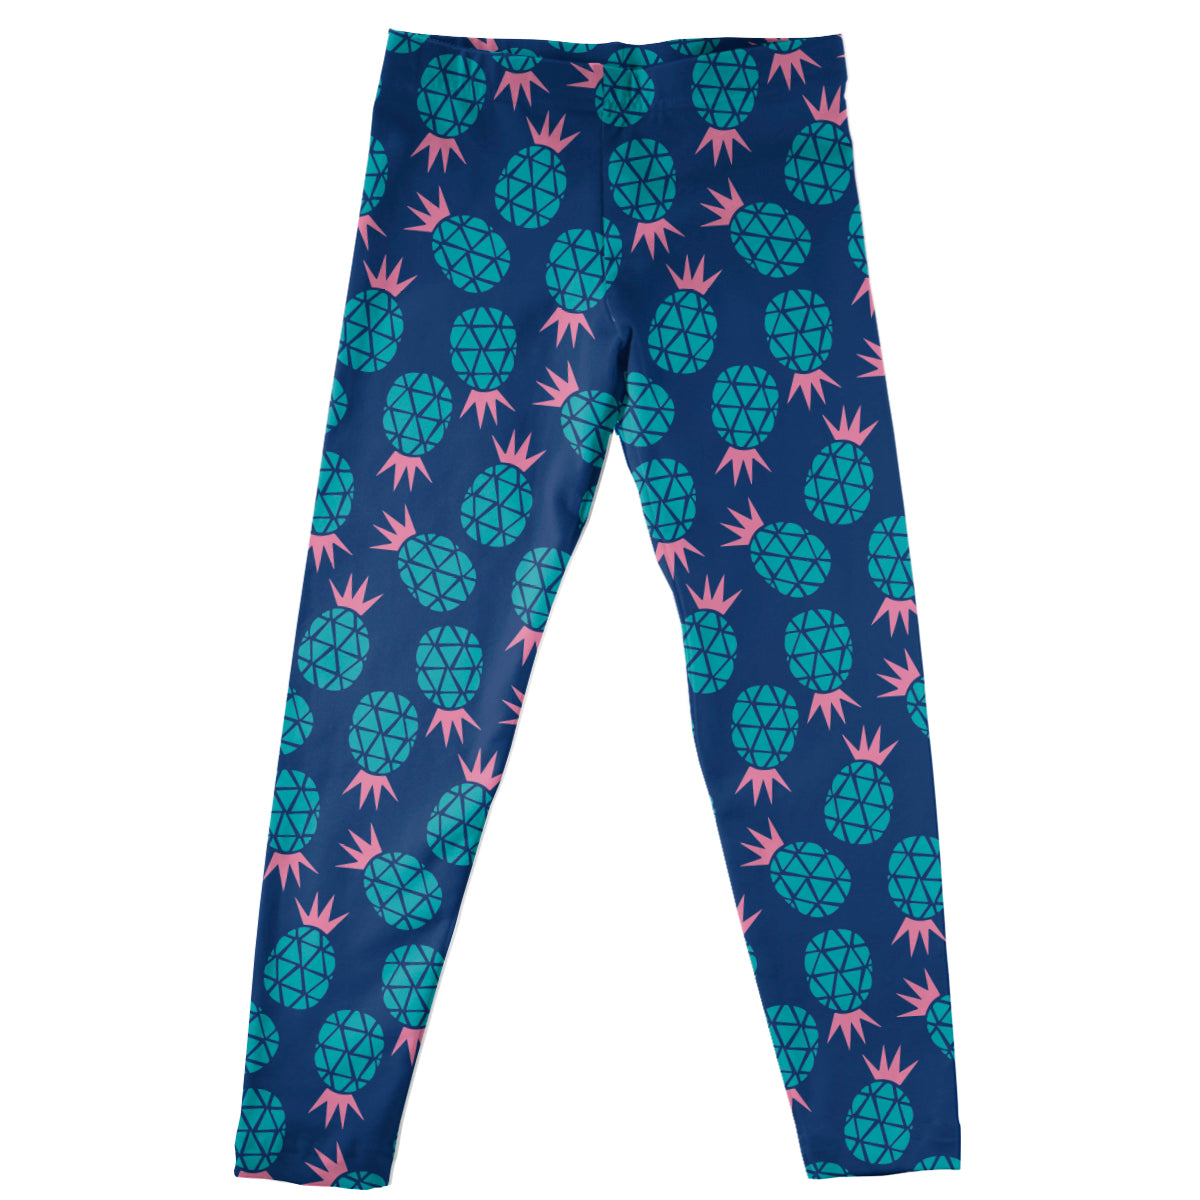 Pineapple Print Navy Turquoise and Pink Leggings